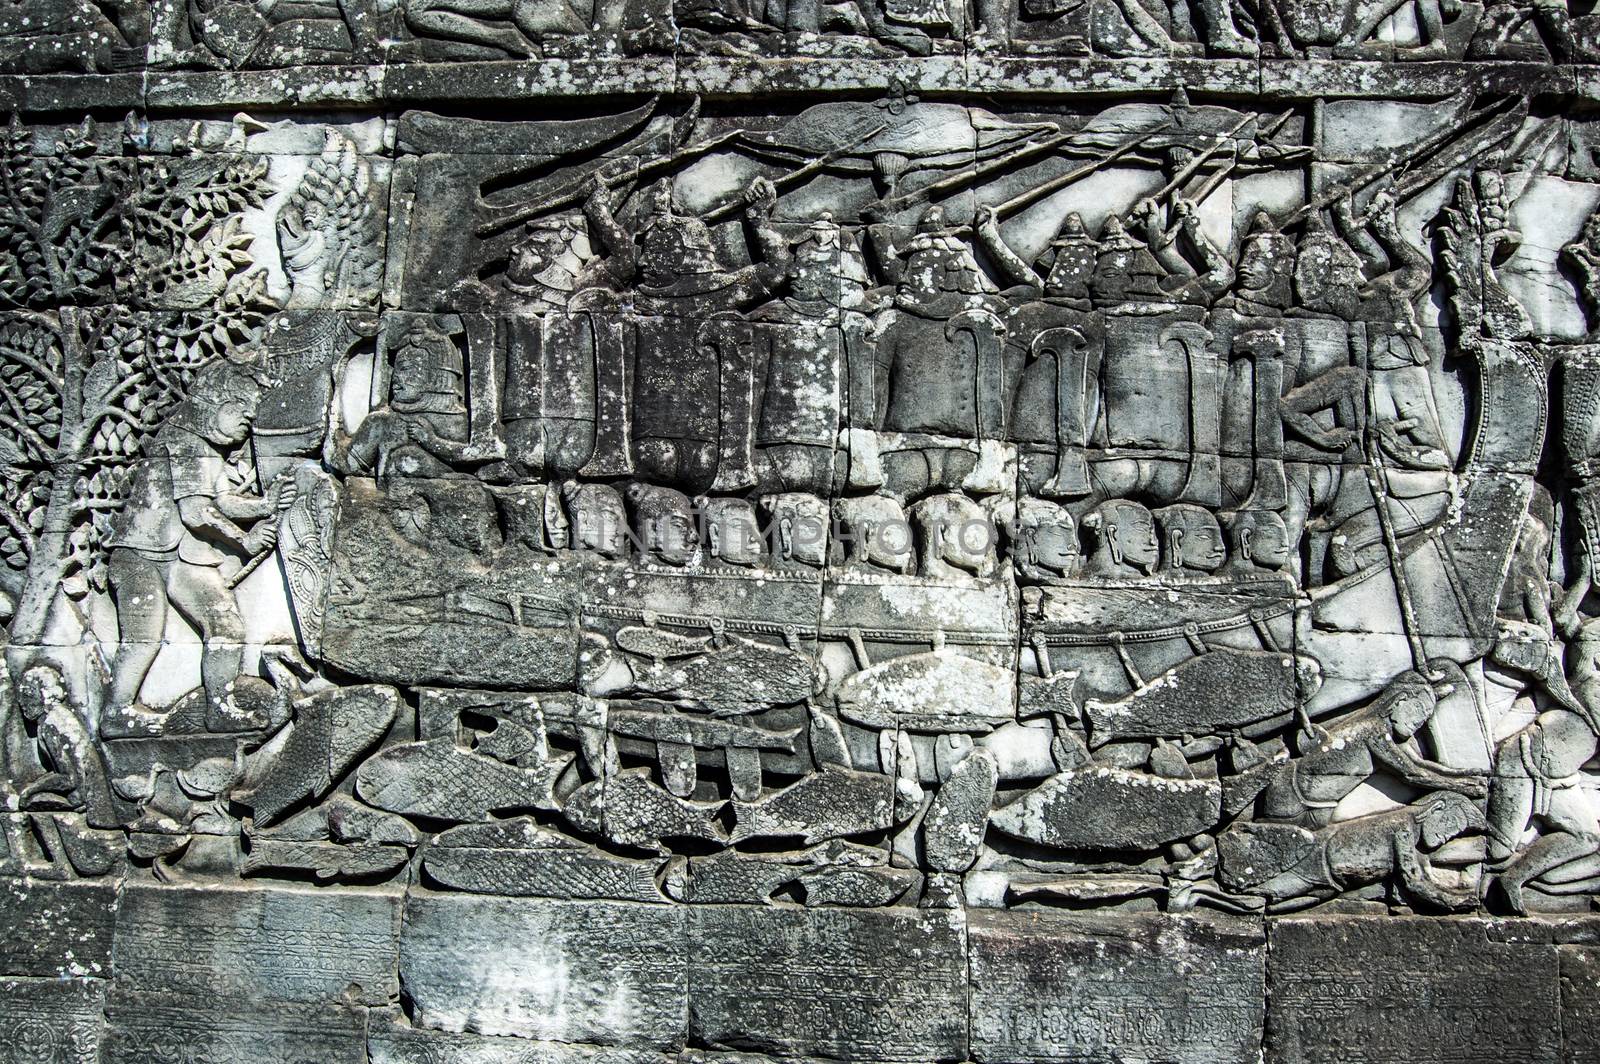 Cham navy in battle, Bayon Temple carving by BasPhoto